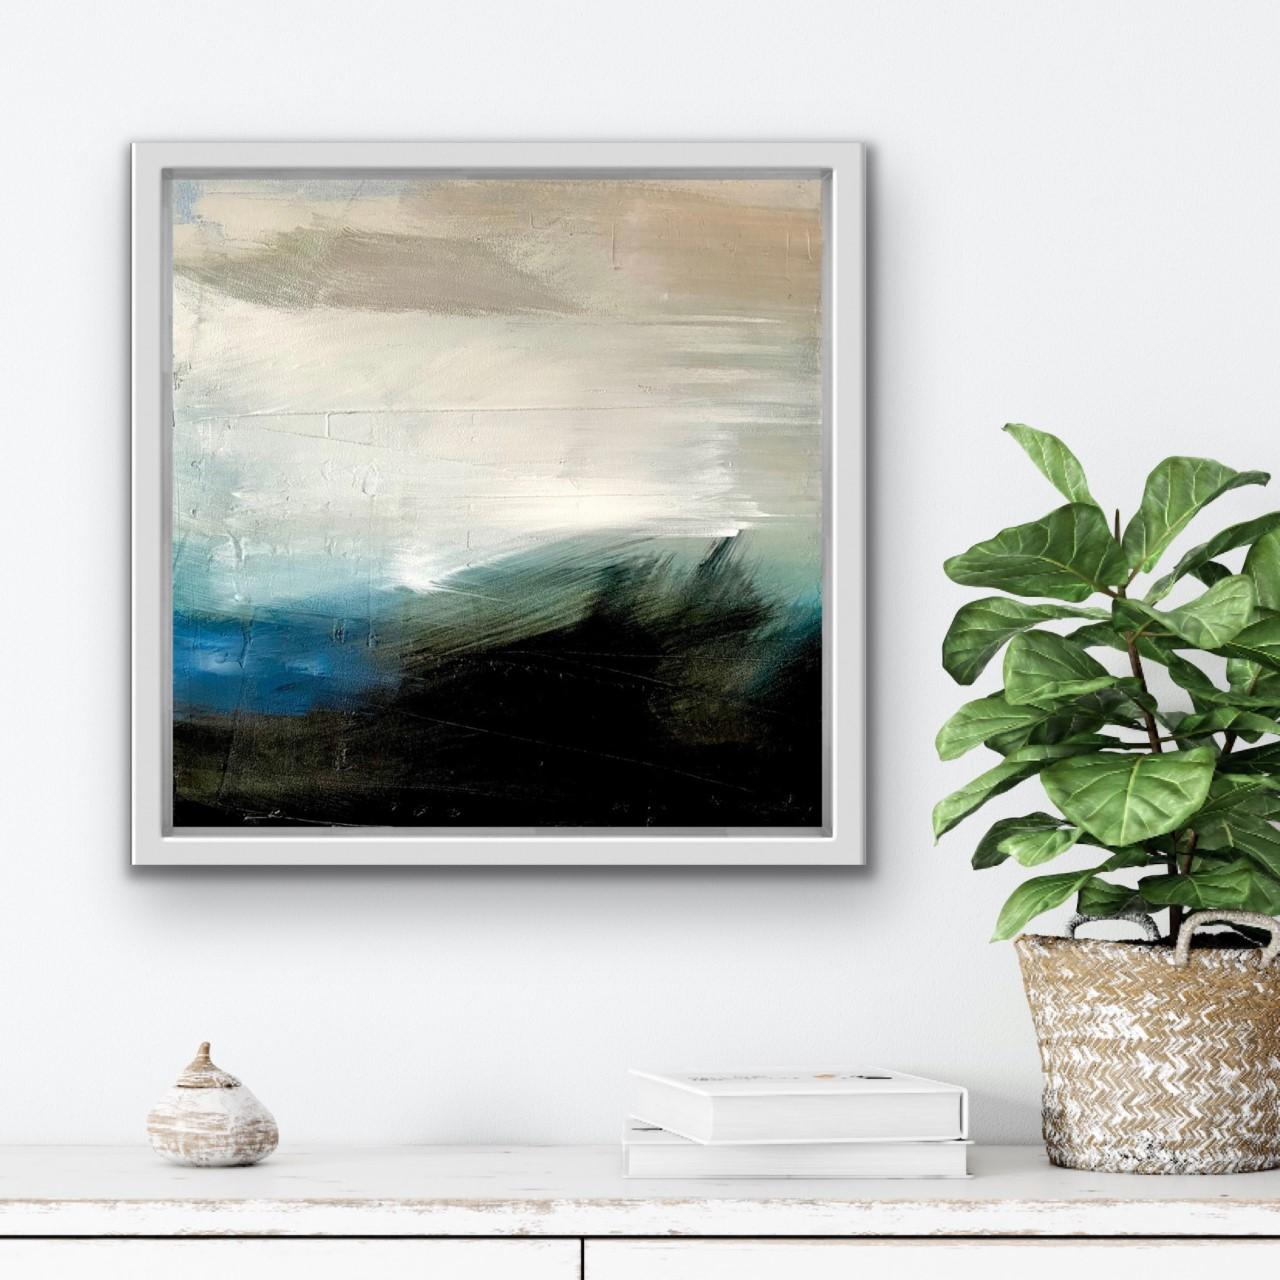 Black Edge - Abstract Painting by Clare Millen